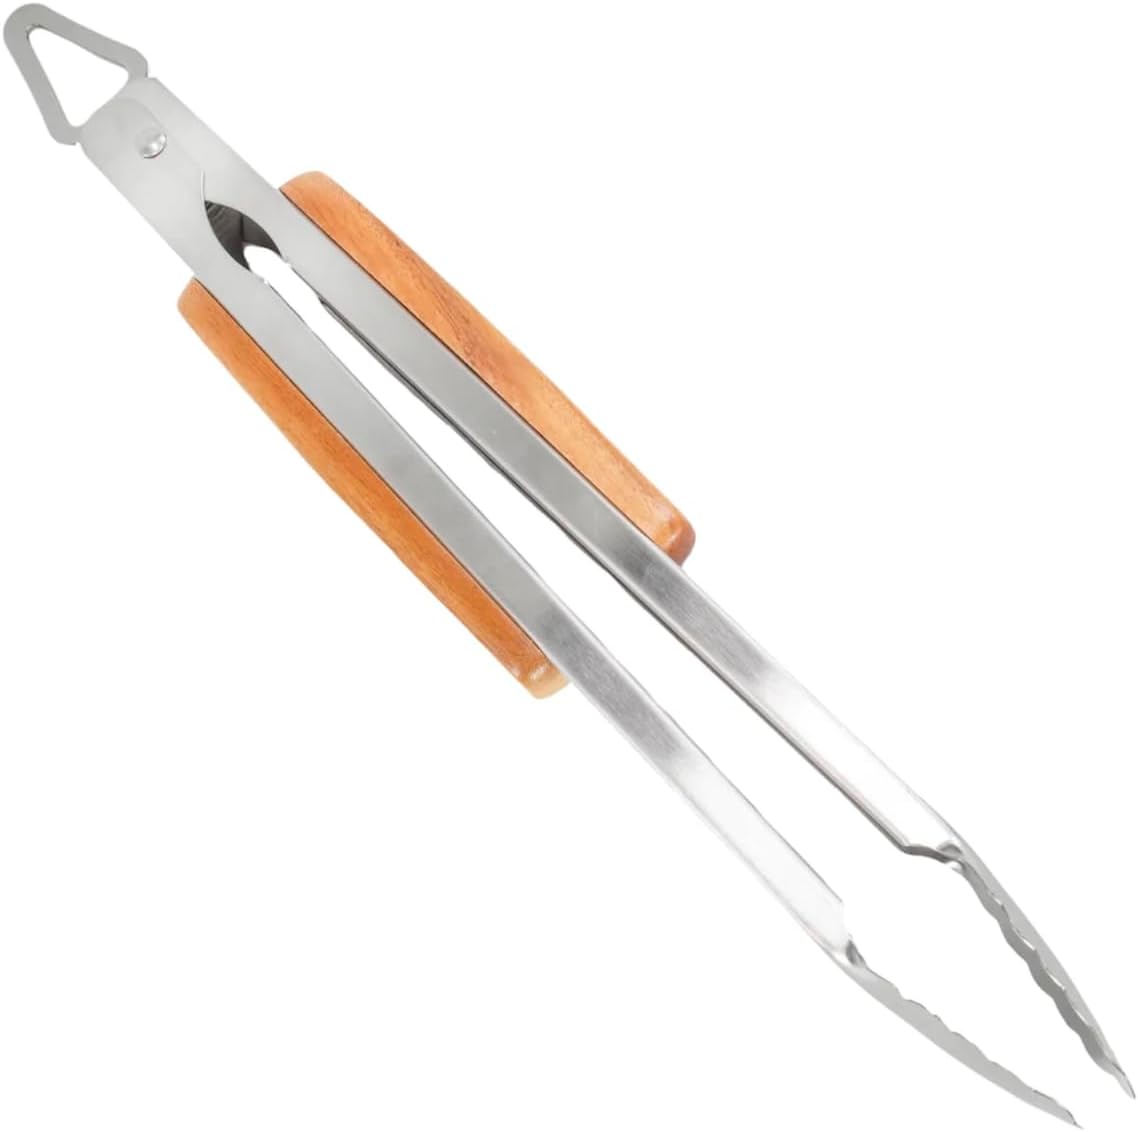 BBQ-AID Pro BBQ Tongs for Grill - 17 Professional Grade Barbecue Tongs for Cooking- Solid  Sturdy - Built with 304 Grade Stainless Steel and Acacia Wood - Heavy Duty Built to Last Kitchen essential.